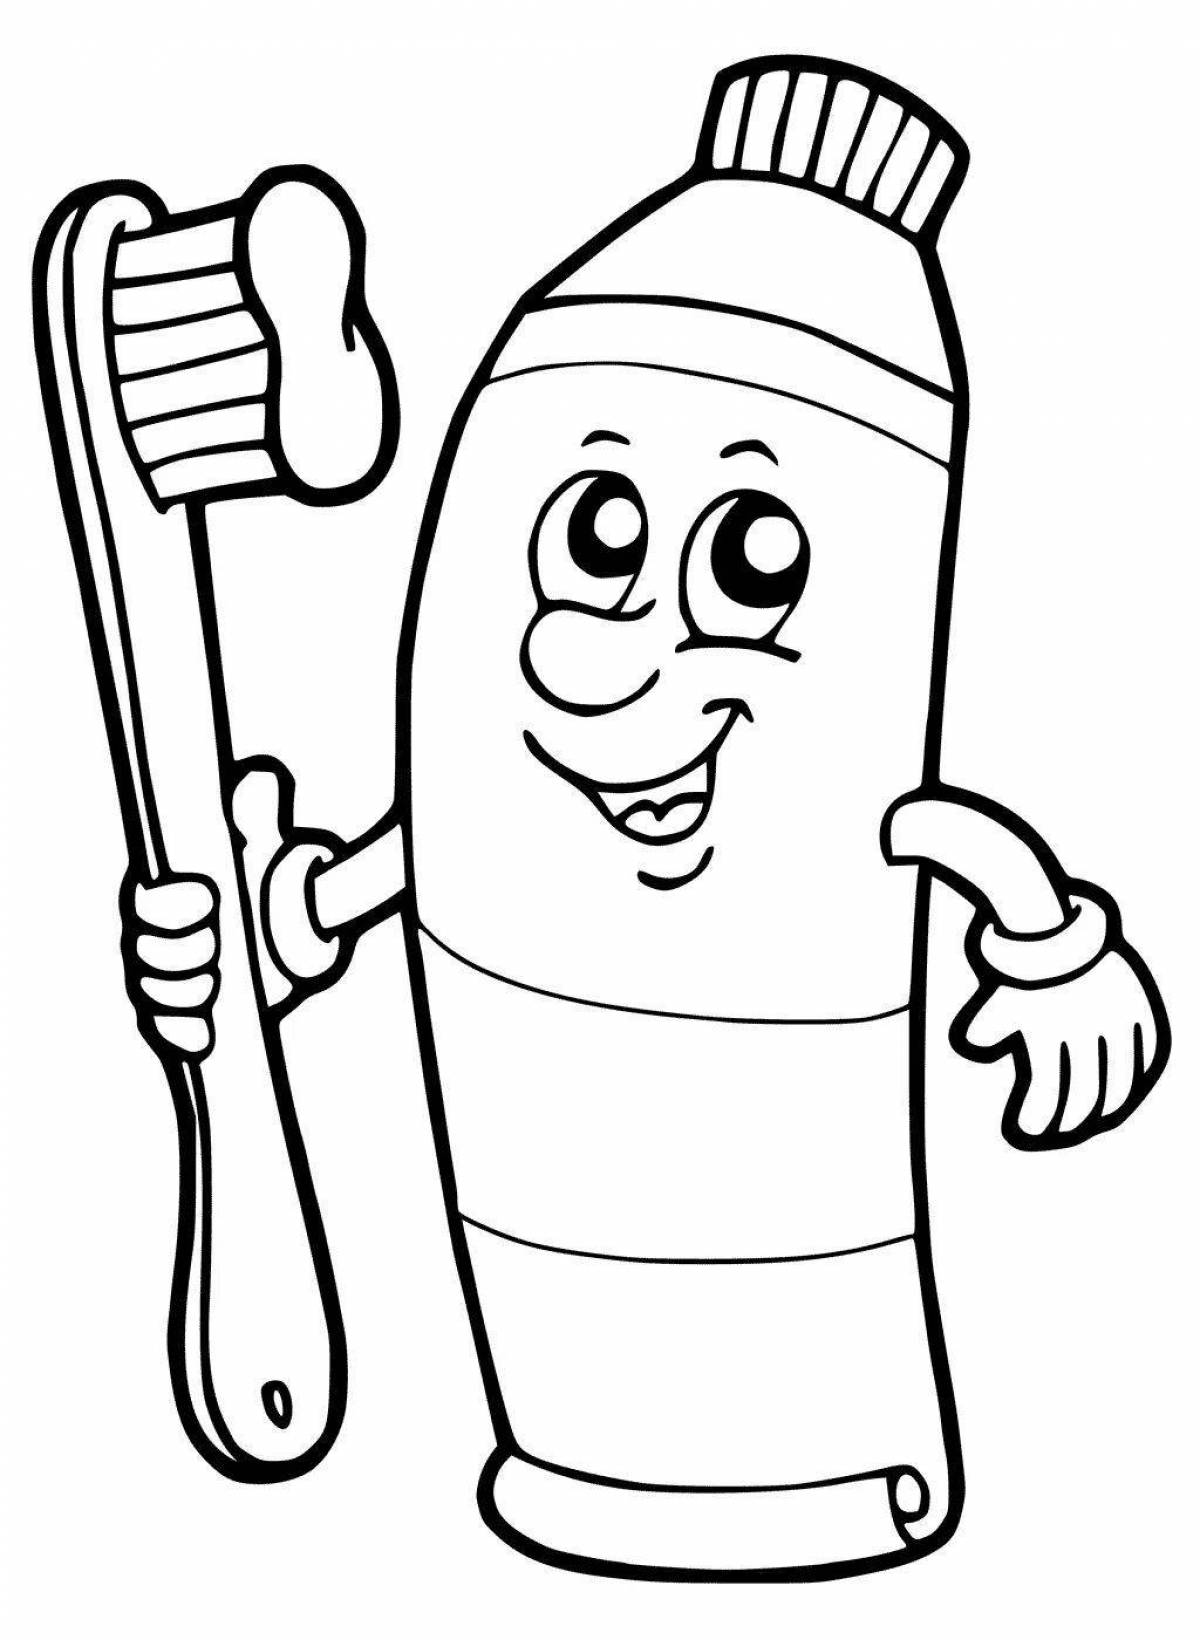 Exciting toothbrush and paste coloring page